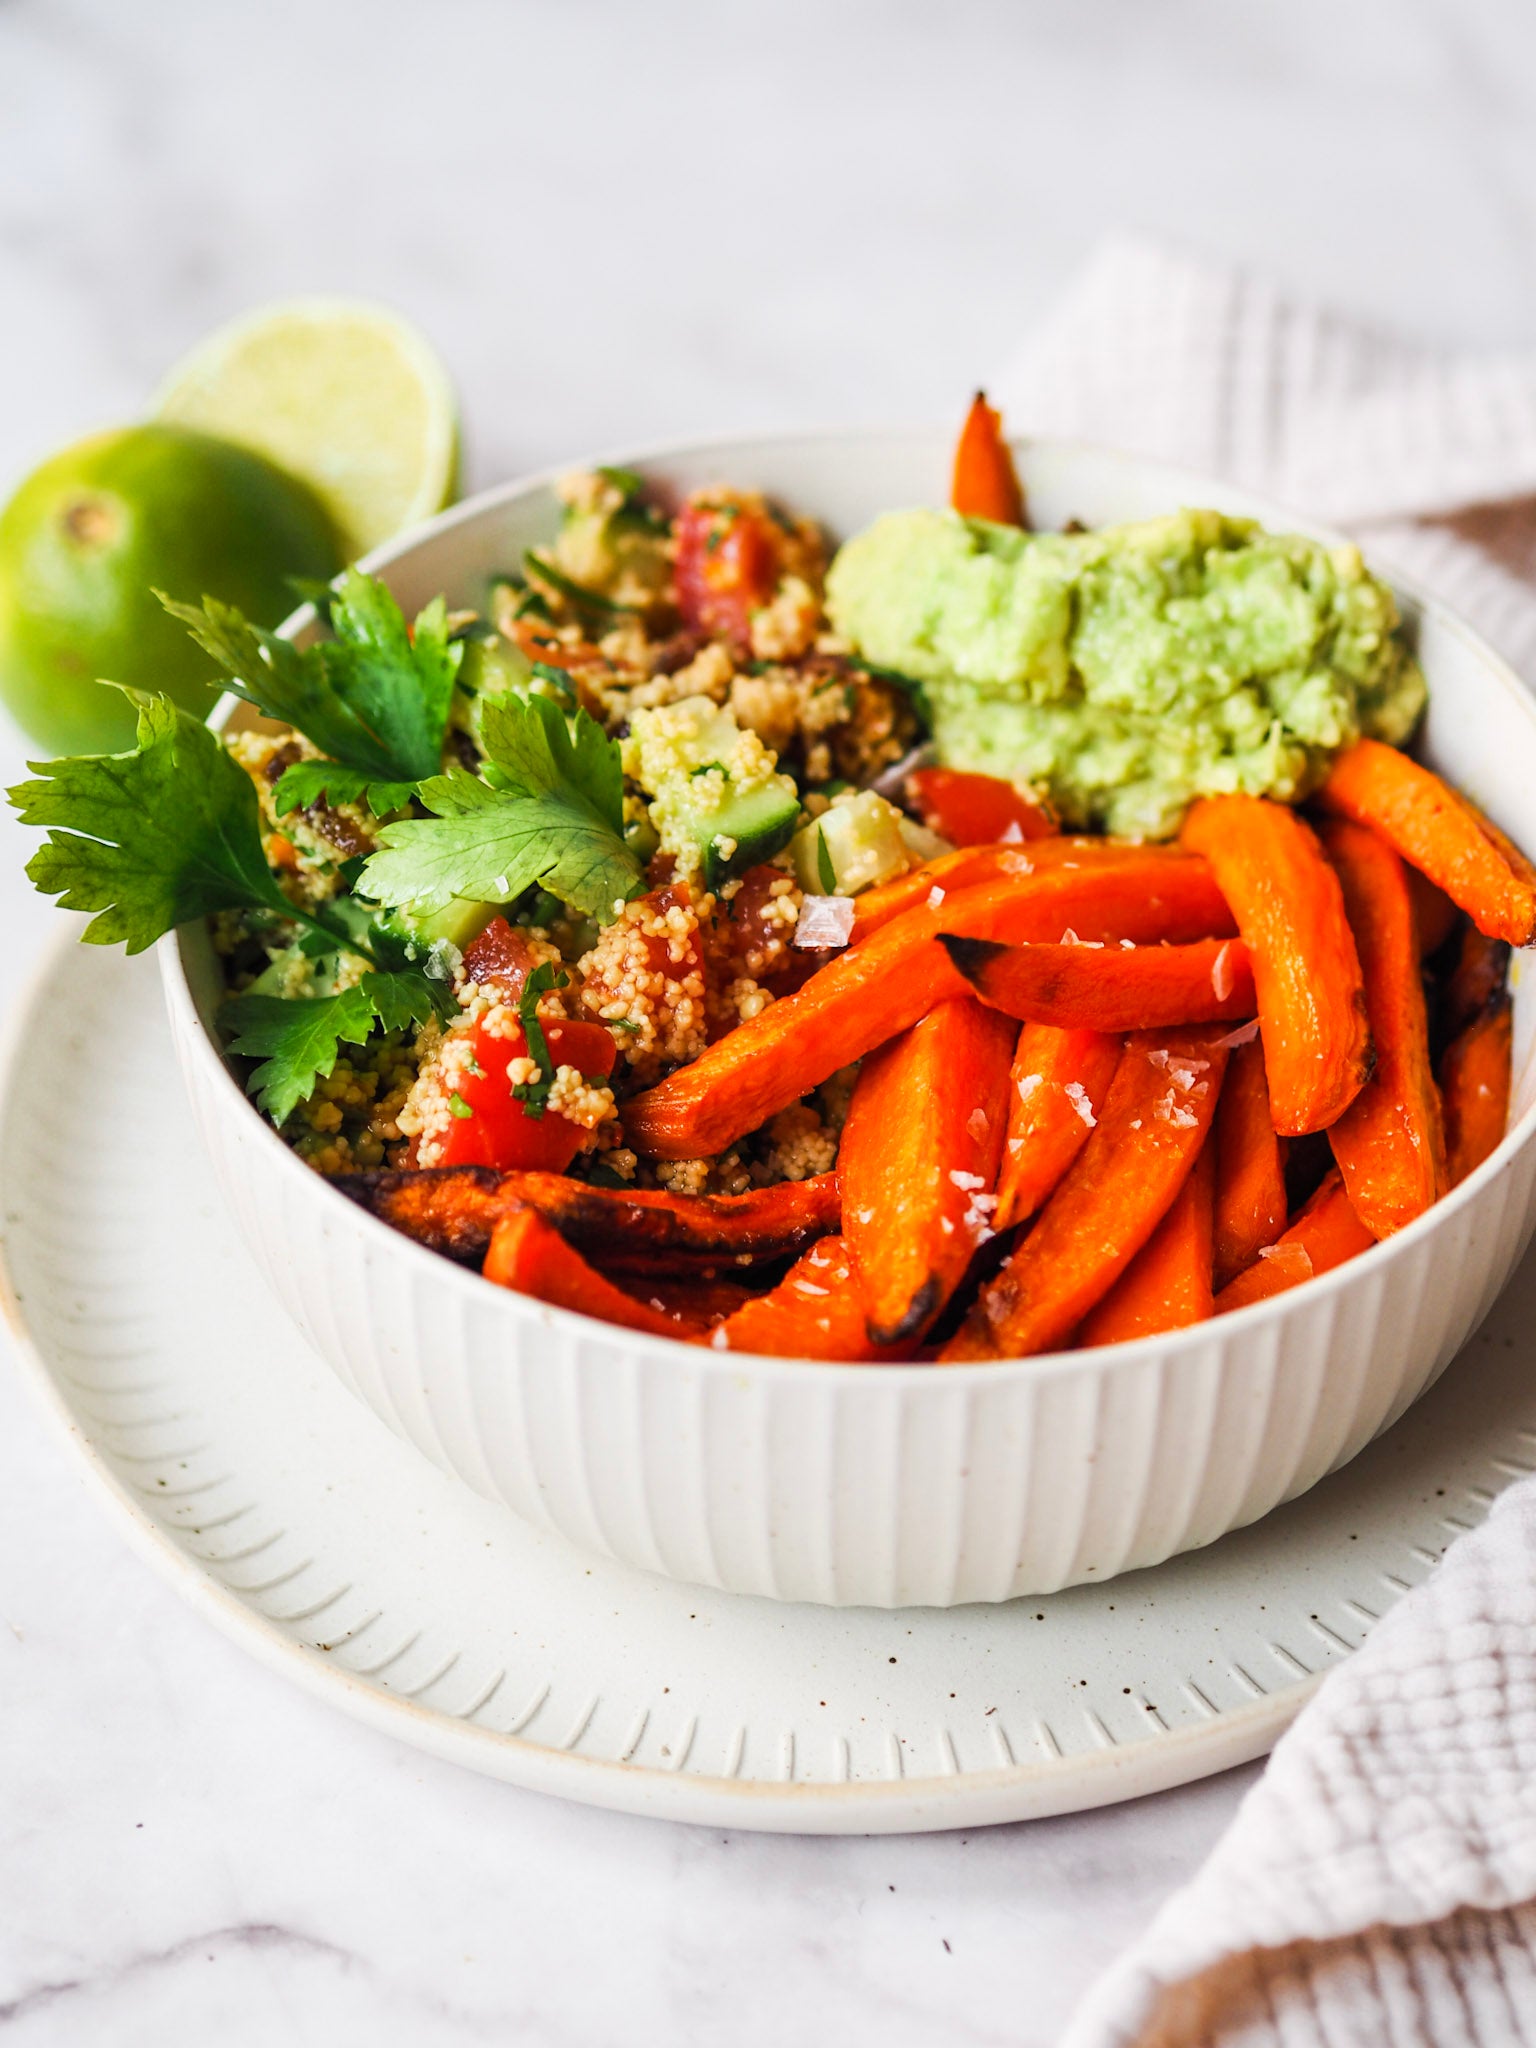 “WHOLESOME HEALTHY LUNCH” SWEET POTATO FRIES WITH AVOCADO MOUSSE & PARSLEY SALAD